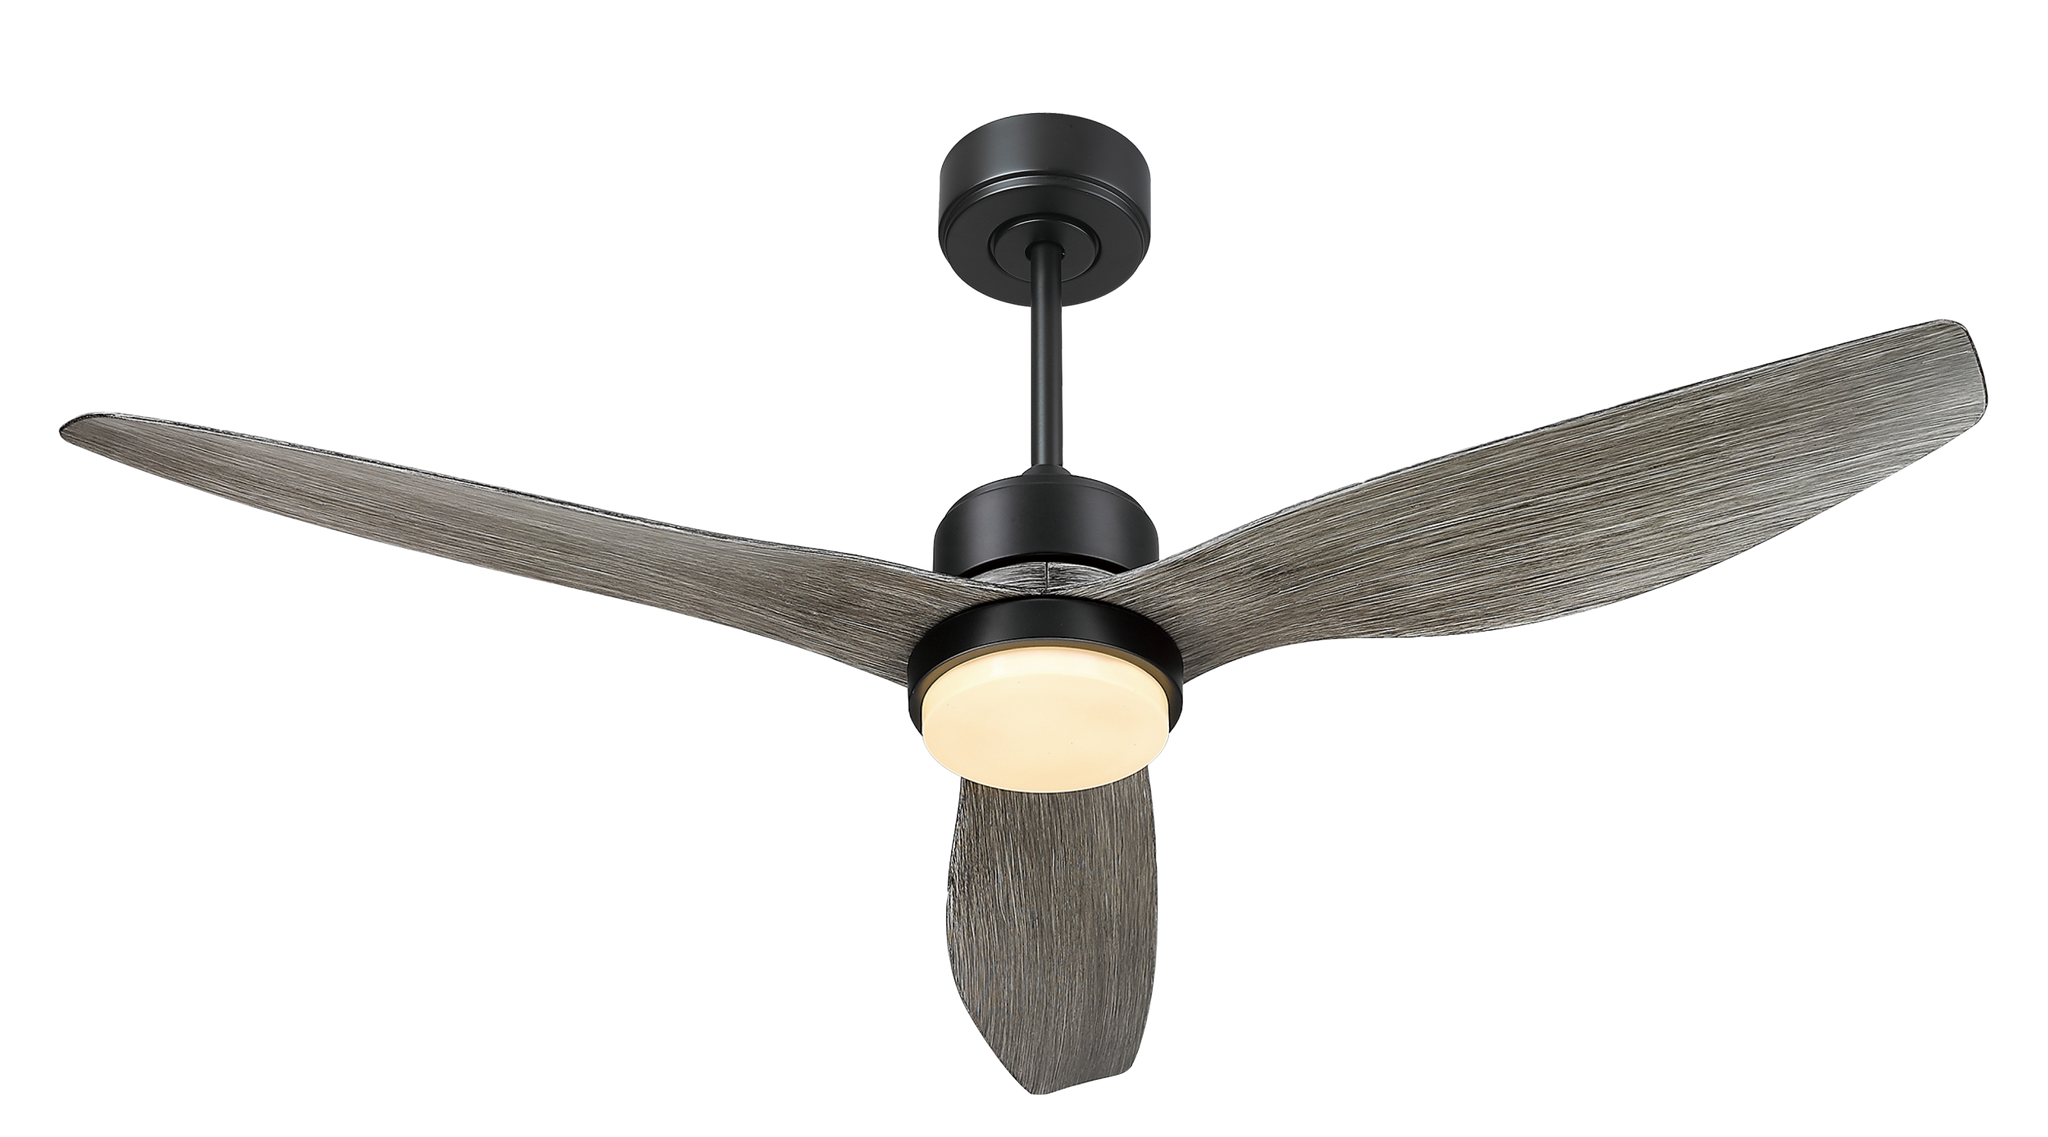 52 Inch Blade Led Propeller Ceiling Fan with